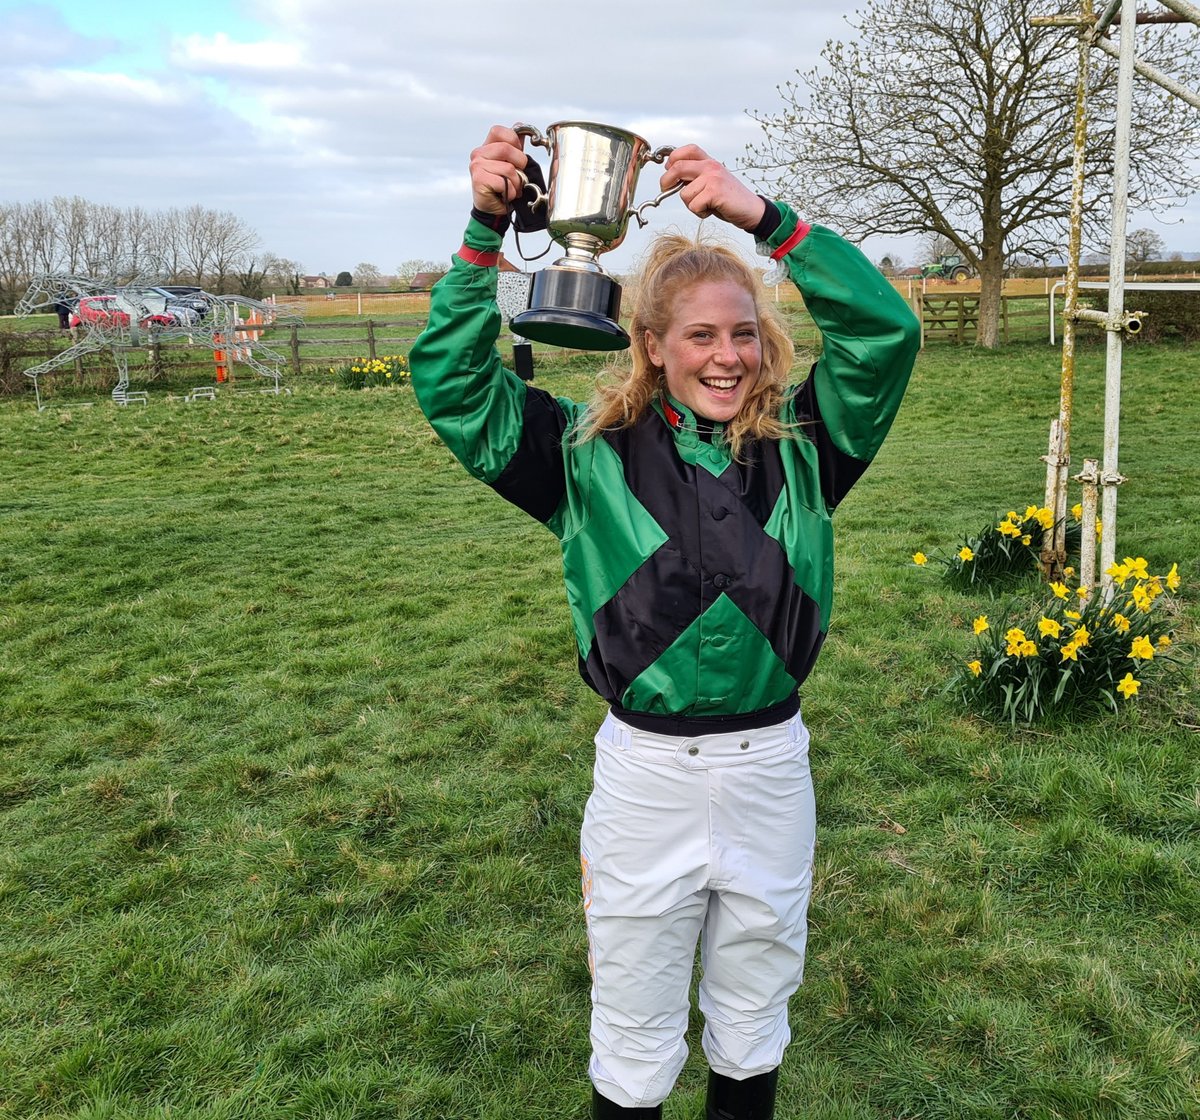 Congratulations to Izzie Marshall who rode Normofthenorth to victory at the Kimble Point-to-point today 🏆 🐎 Our thanks to the organisers for putting together an excellent event under difficult circumstances @KimblewickRaces #point-to-point #horse #racing #winner #trophy